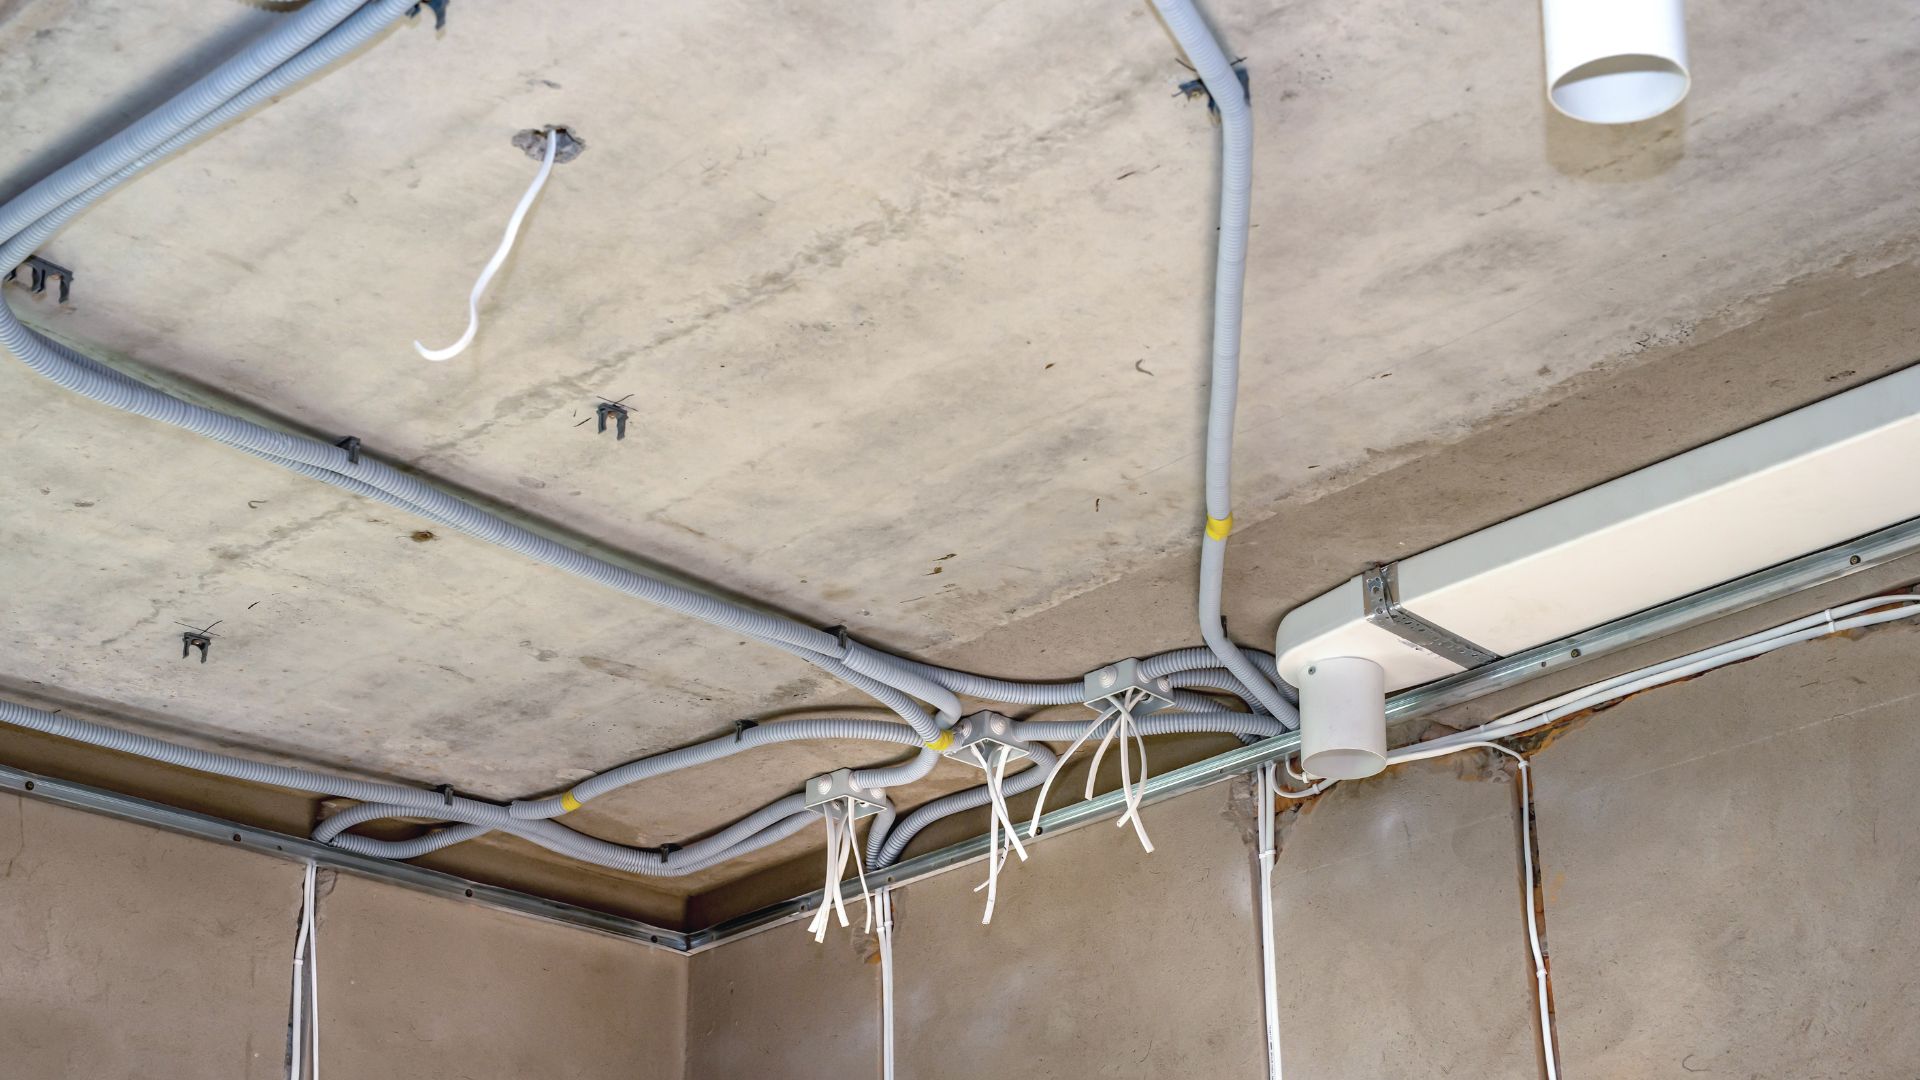 Can I put a junction box in the ceiling